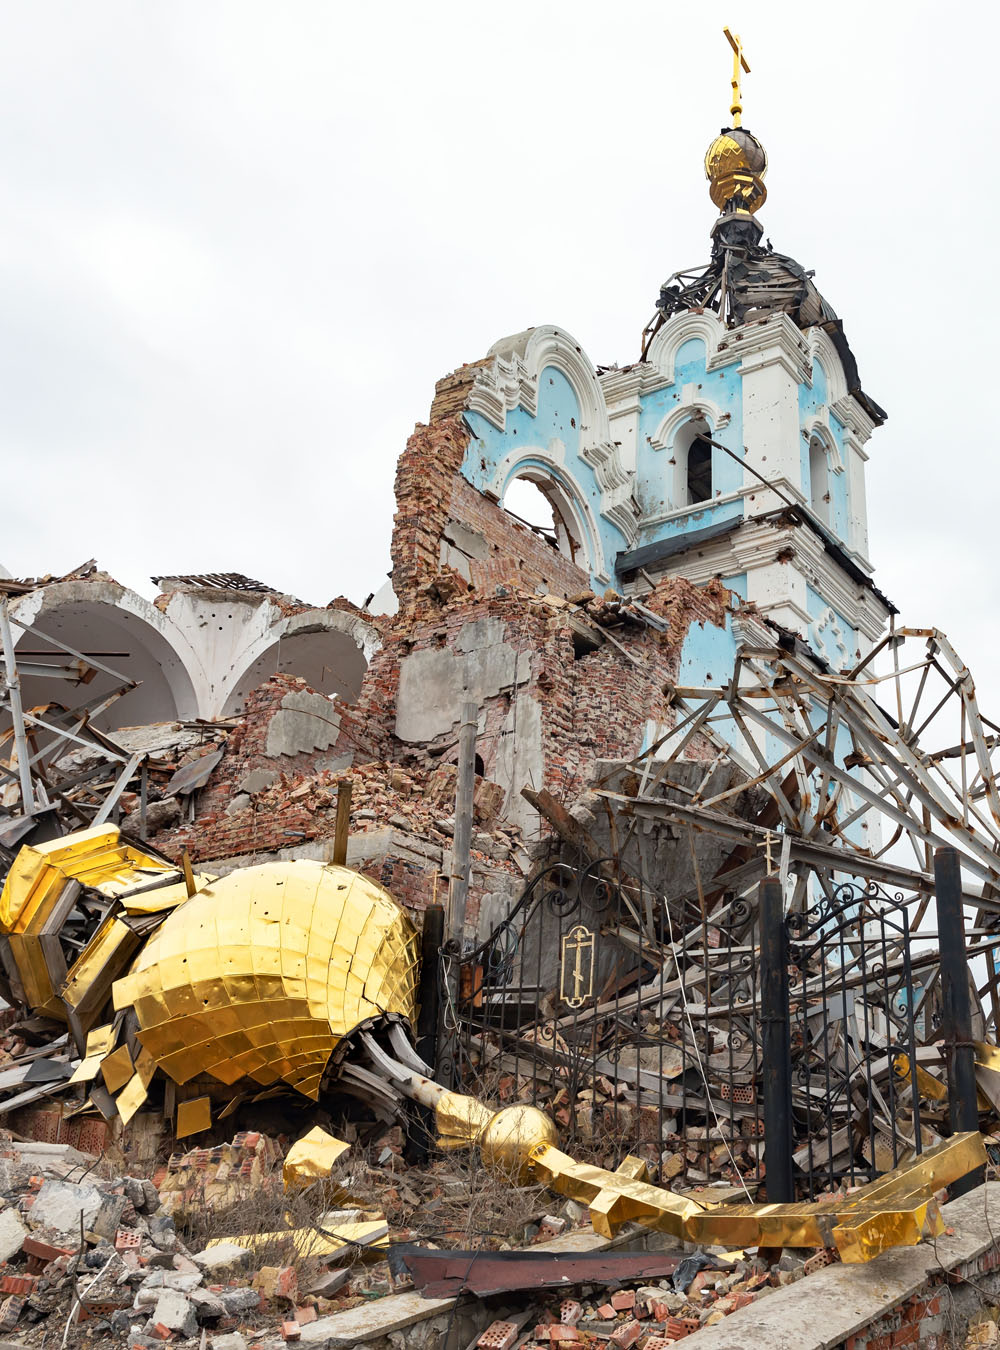 Scars of war. The tragic aftermath of violence and aggression, as a church stands in ruins from the horrors of war in Bogorodichne Donetsk reg., a victim of Russian military action against Ukraine. 